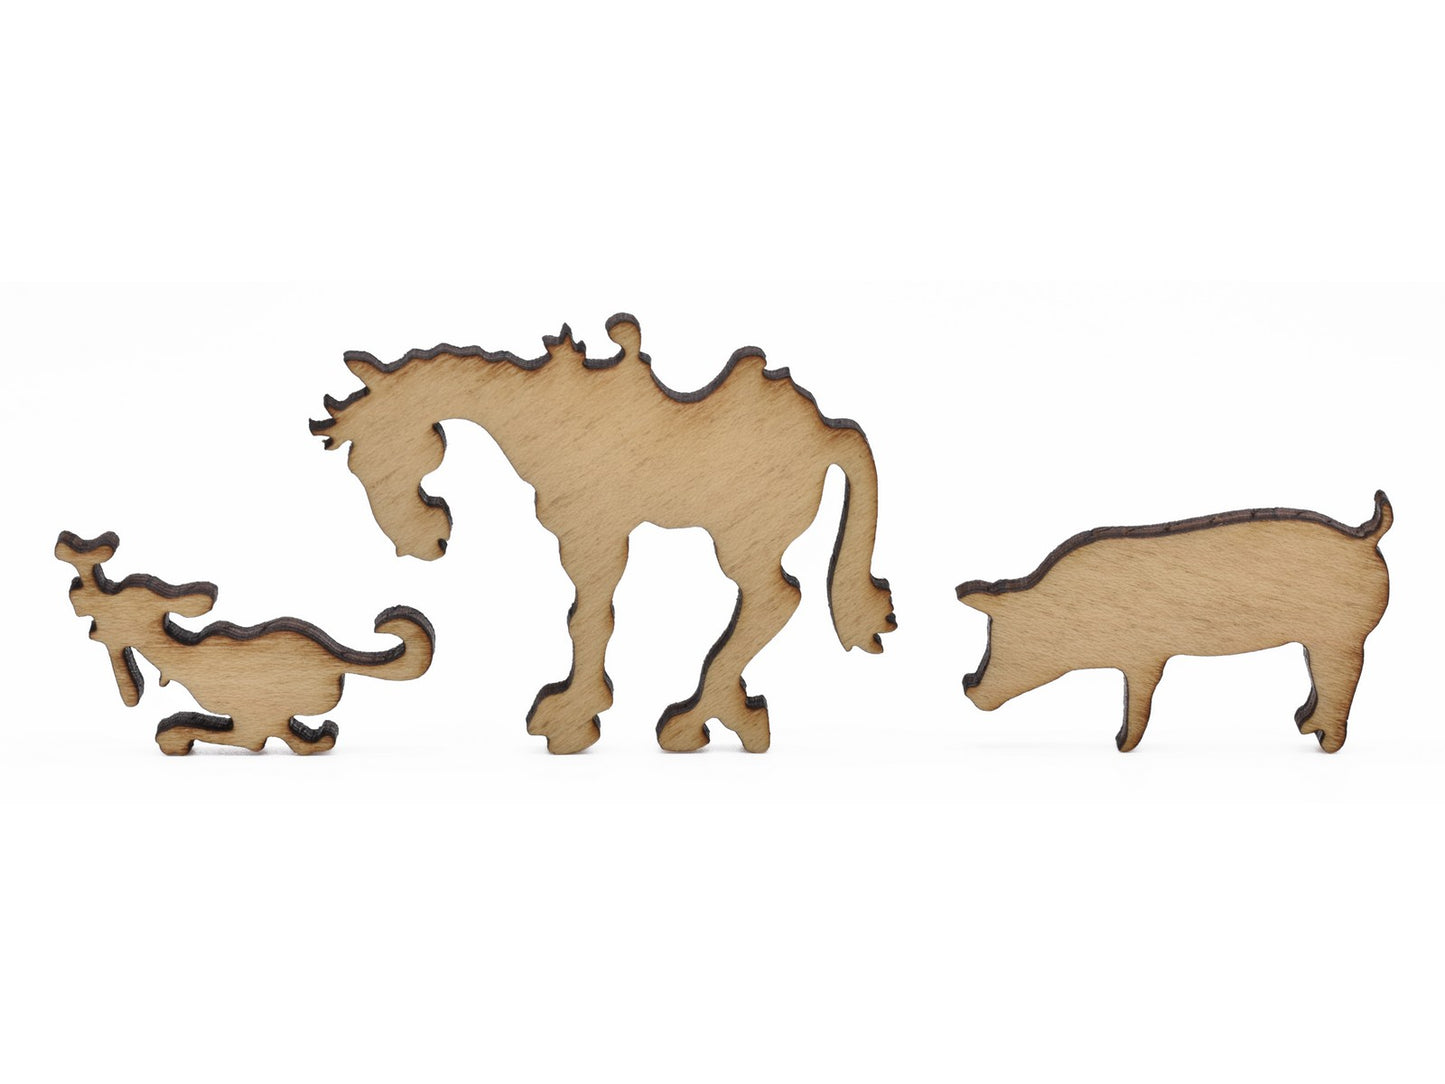 A closeup of pieces in the shape of a dog, a horse, and a pig.